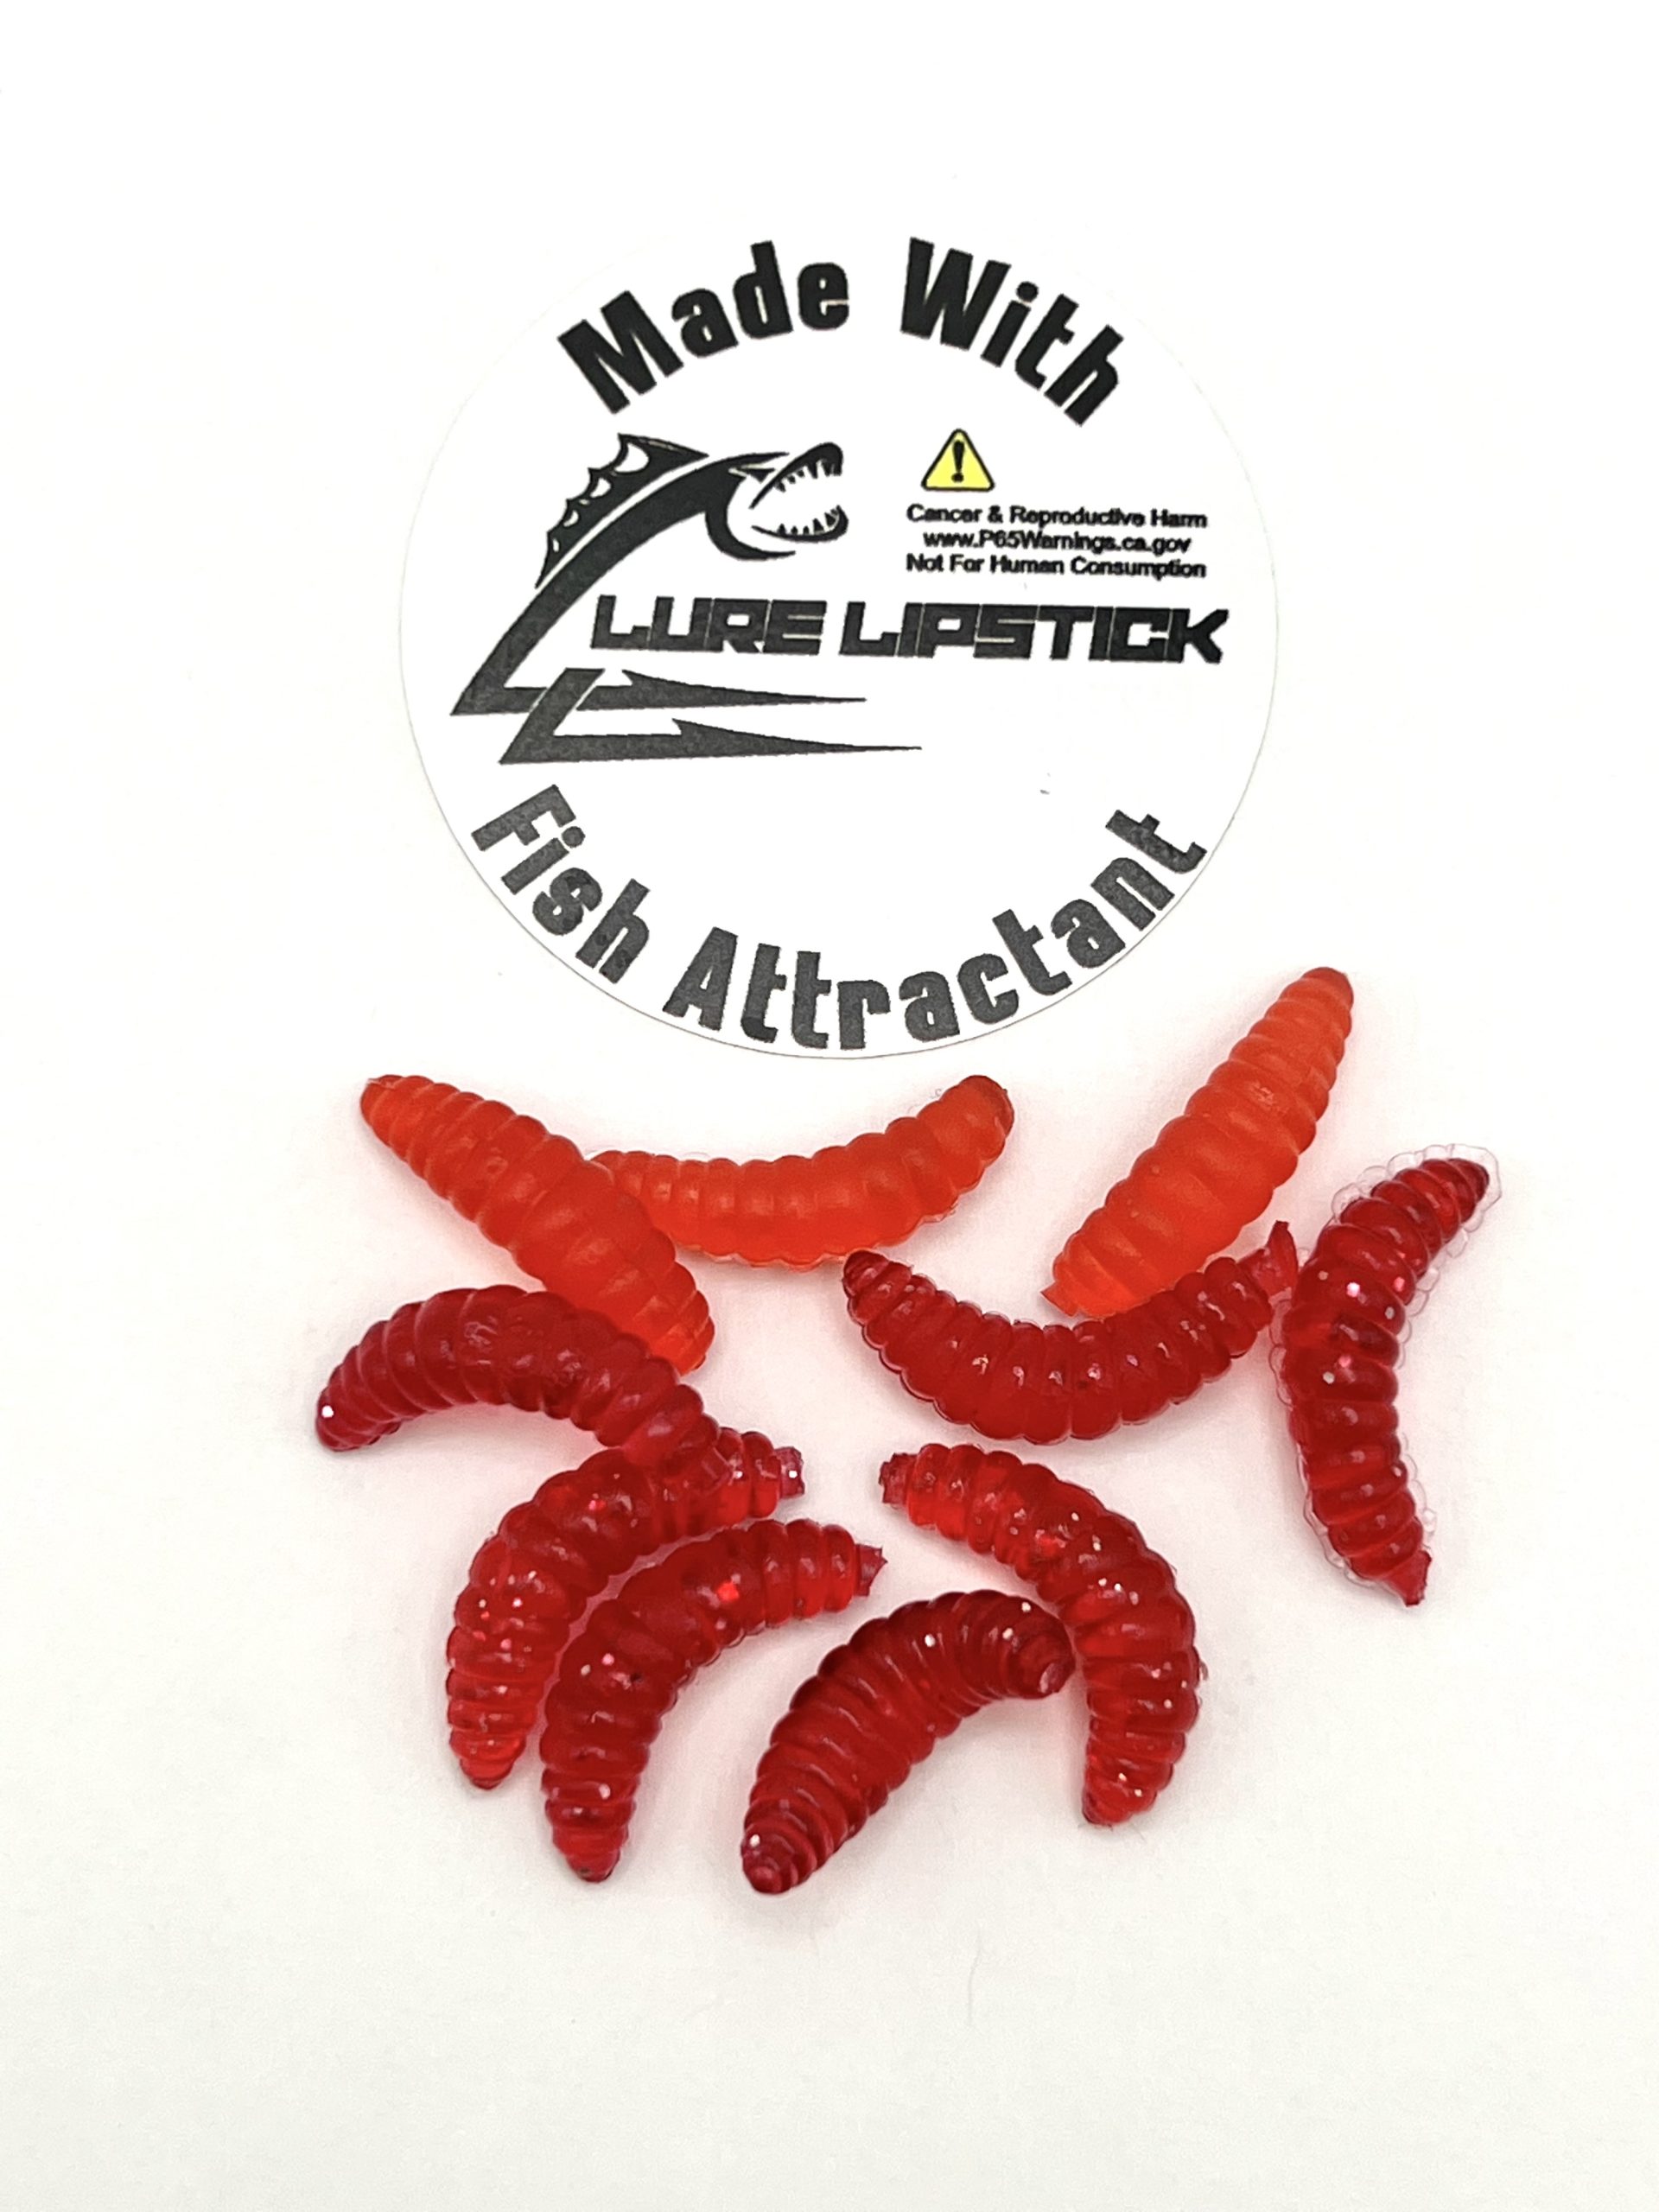 Lure Lipstick – Wax Worm Jelly – 3oz. Available in Squirt Top or